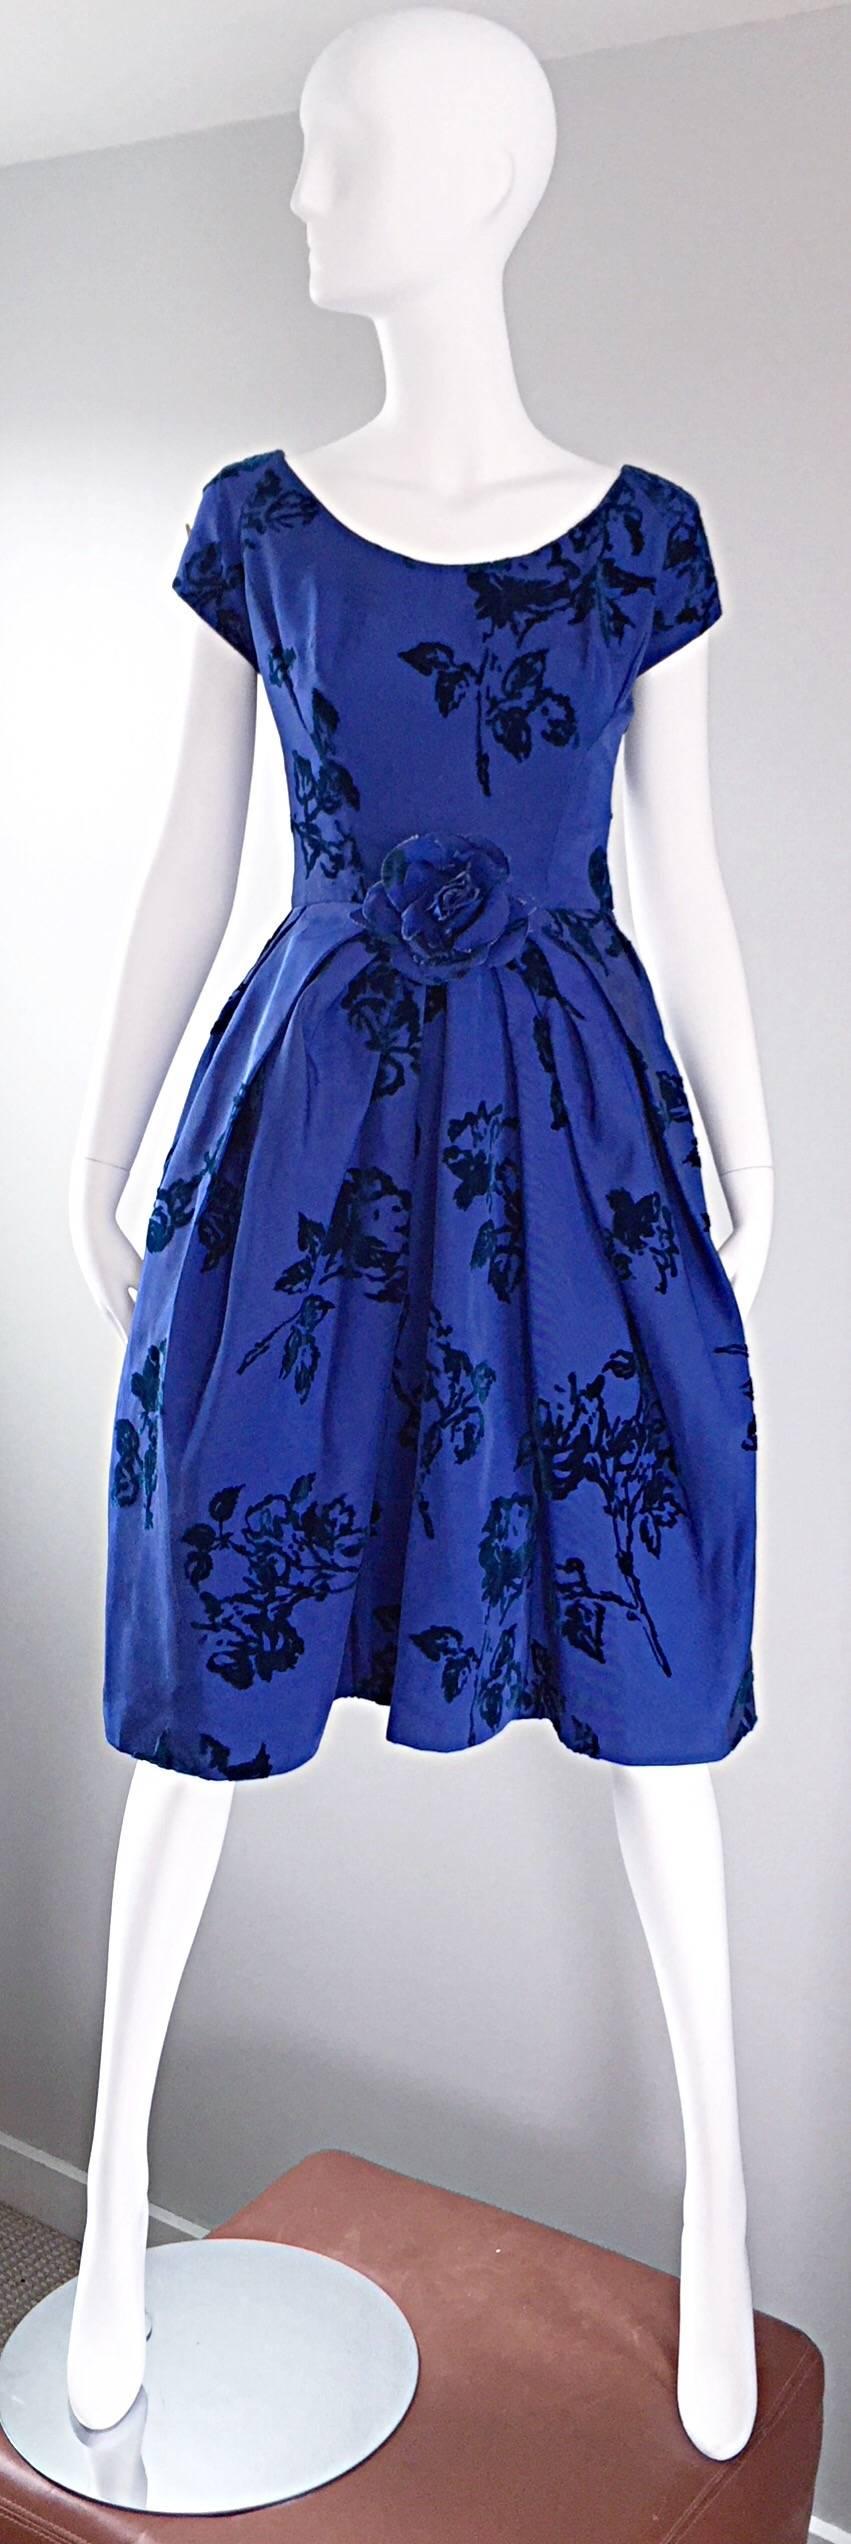 Demi Couture Royal Blue Silk Flower Abstract Vintage Dress, 1950s For Sale 2